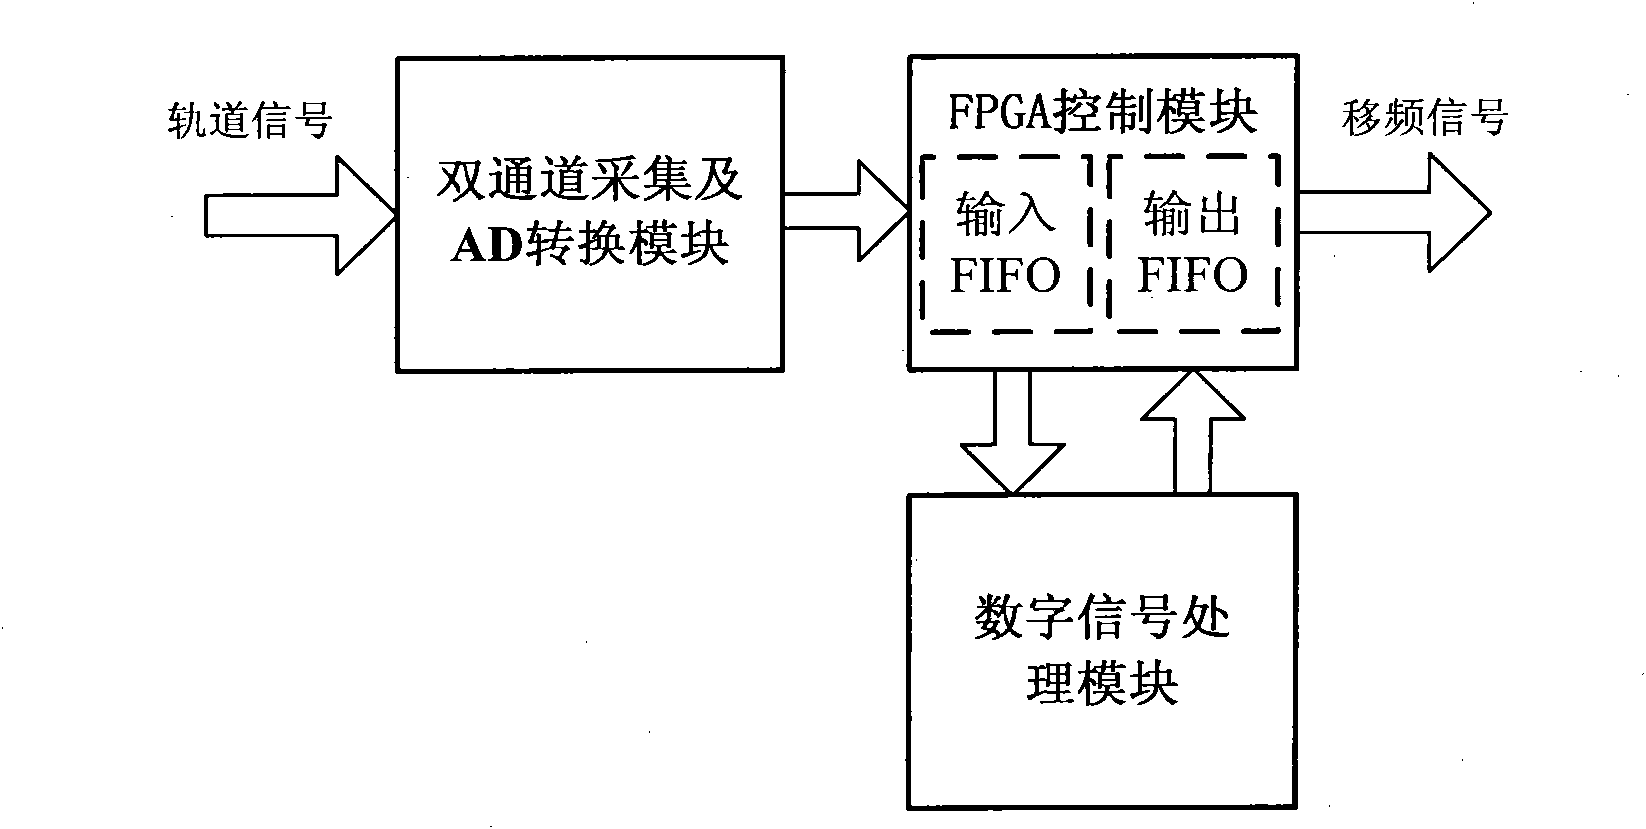 Railway frequency shift signal anti-interference device and method based on blind source separation